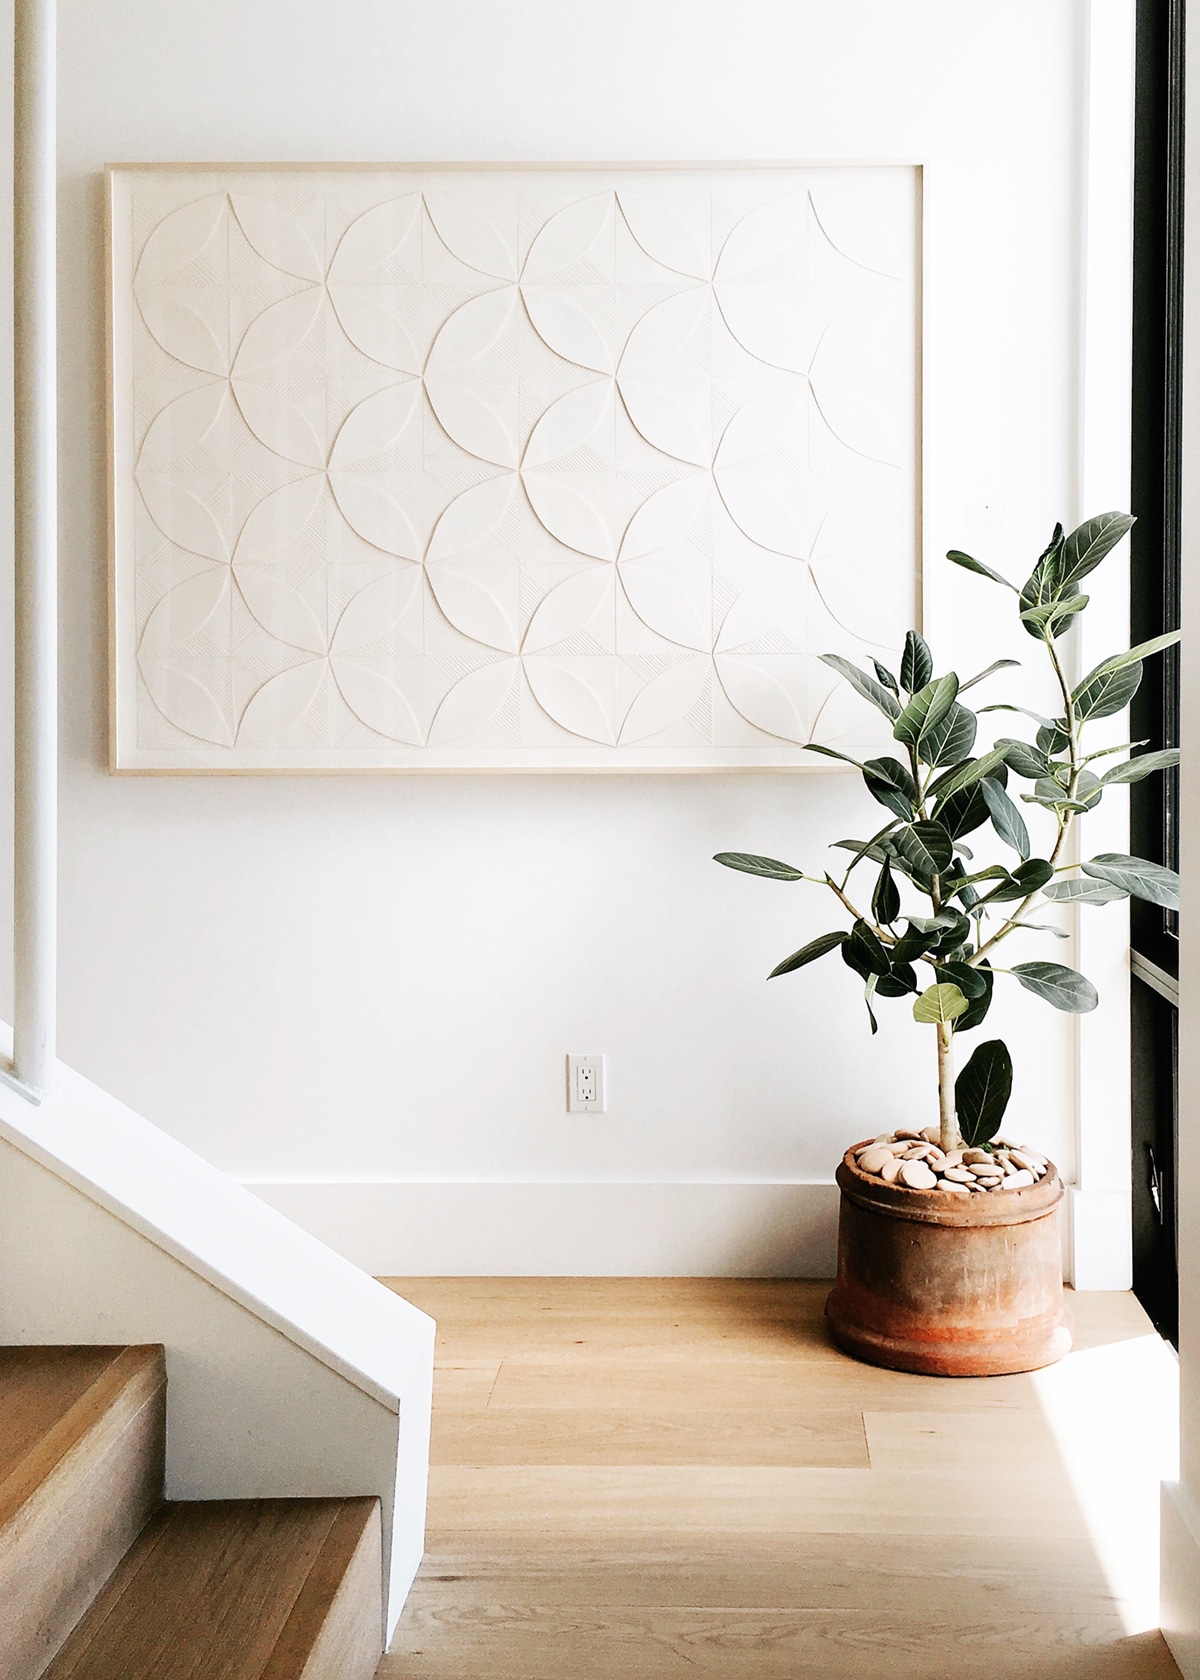 white artwork and rubber tree plant in terra cotta pot entryway landing | photo by cassandra lavalle